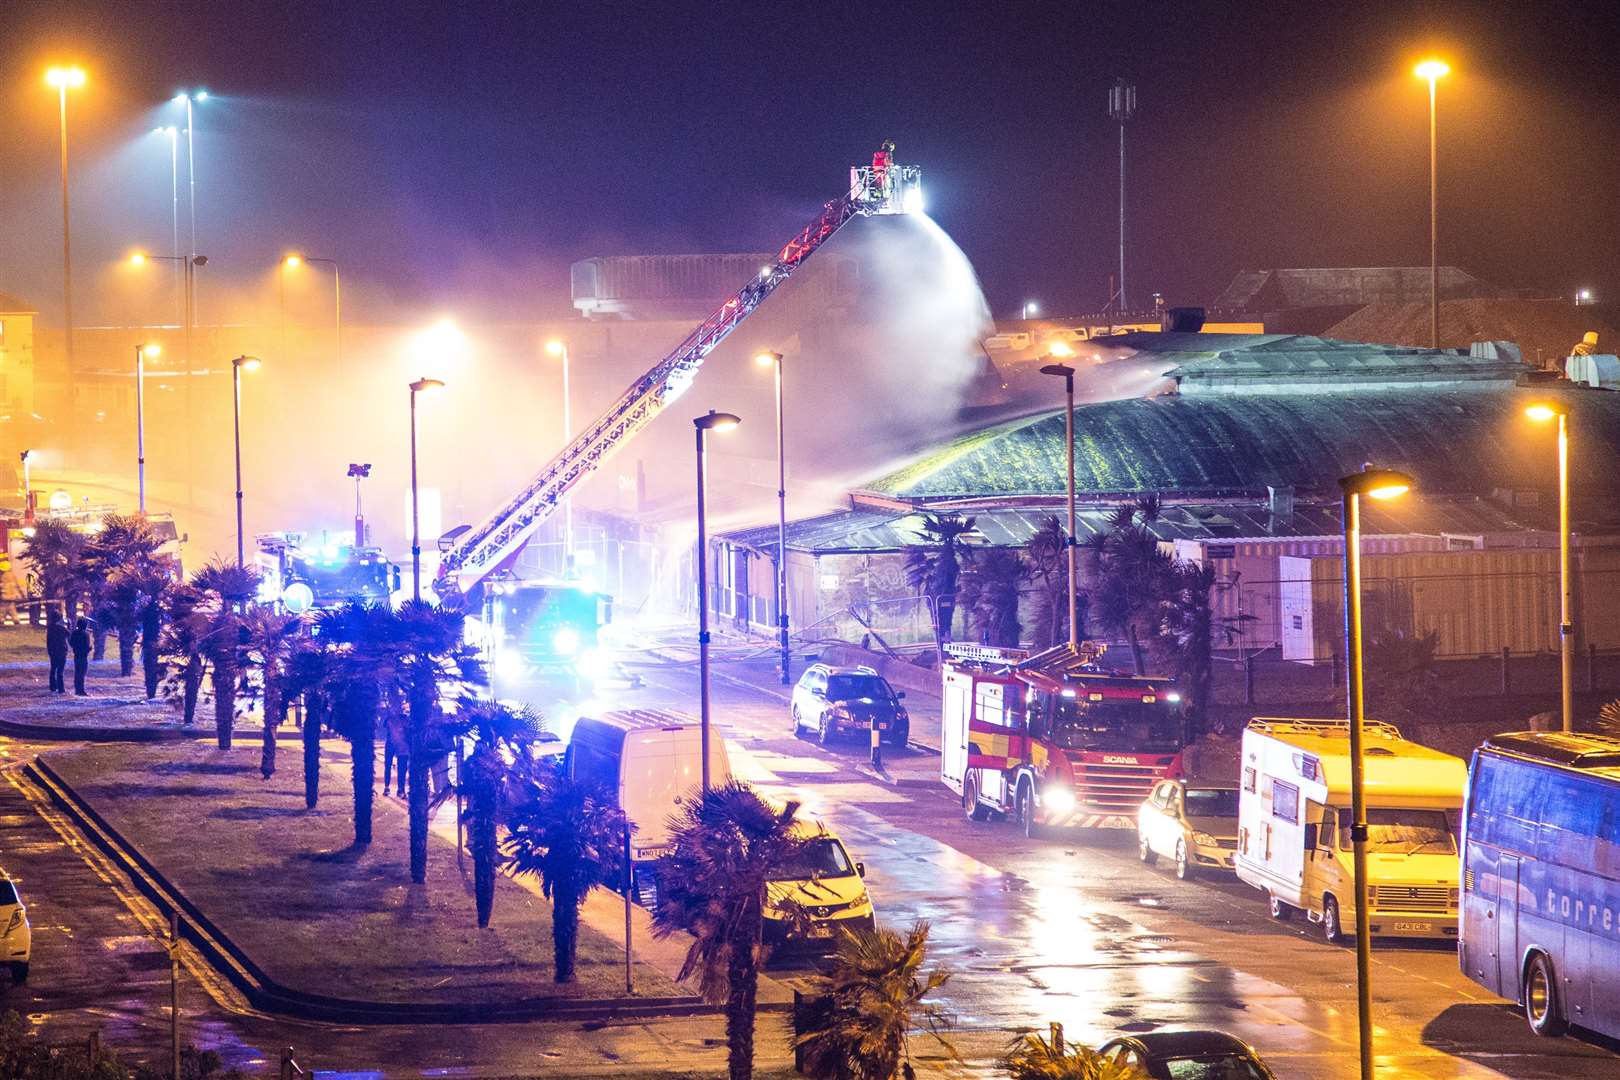 Folkestone photographer Dan Desborough captured some stunning images of the Onyx fire at its height